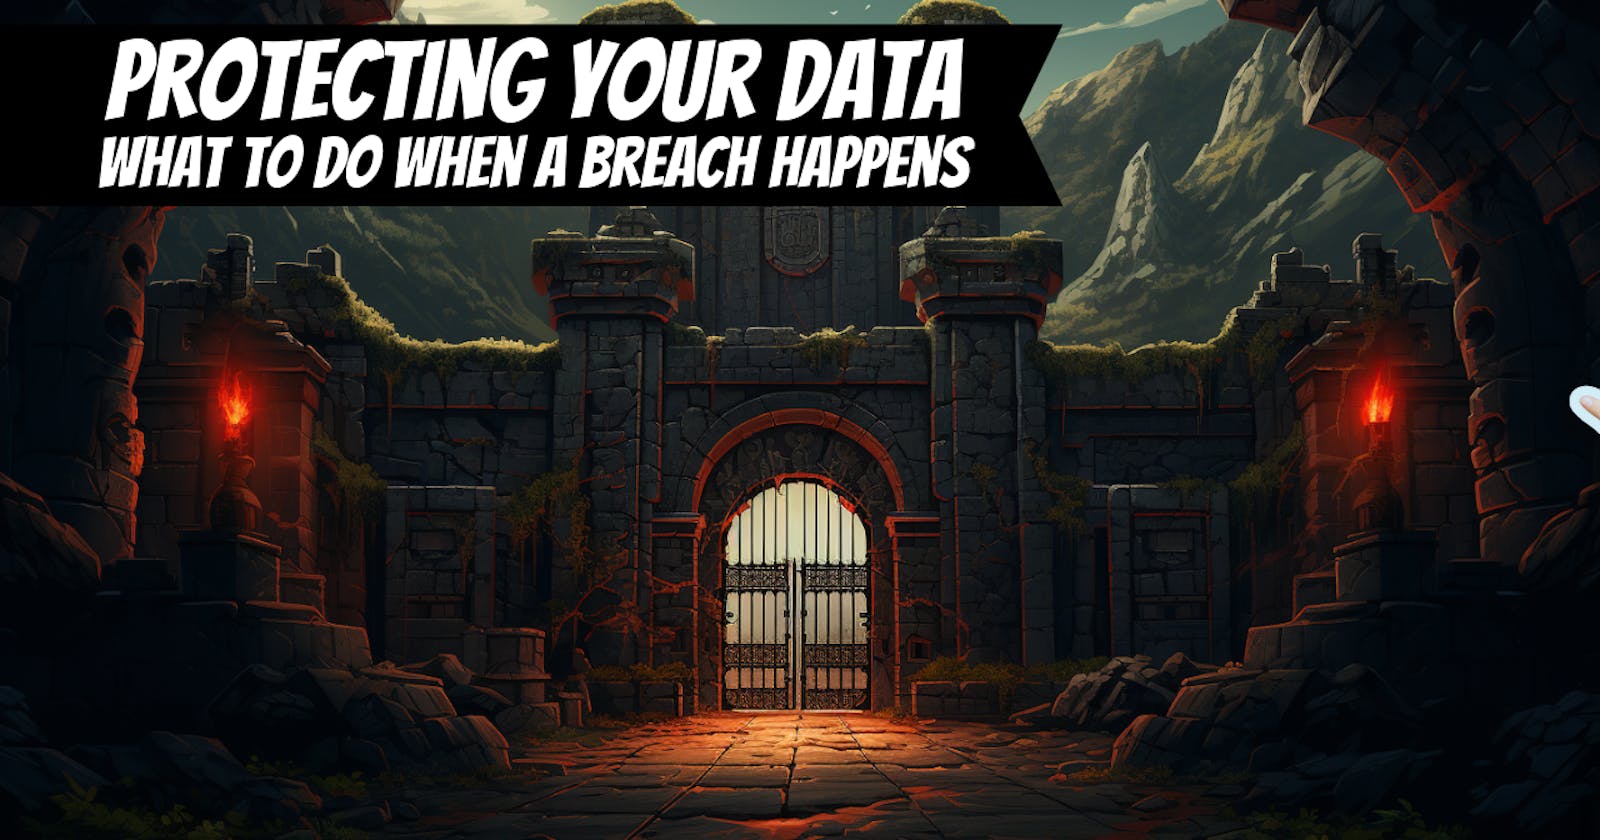 Protecting Your Data: What to Do When a Breach Happens